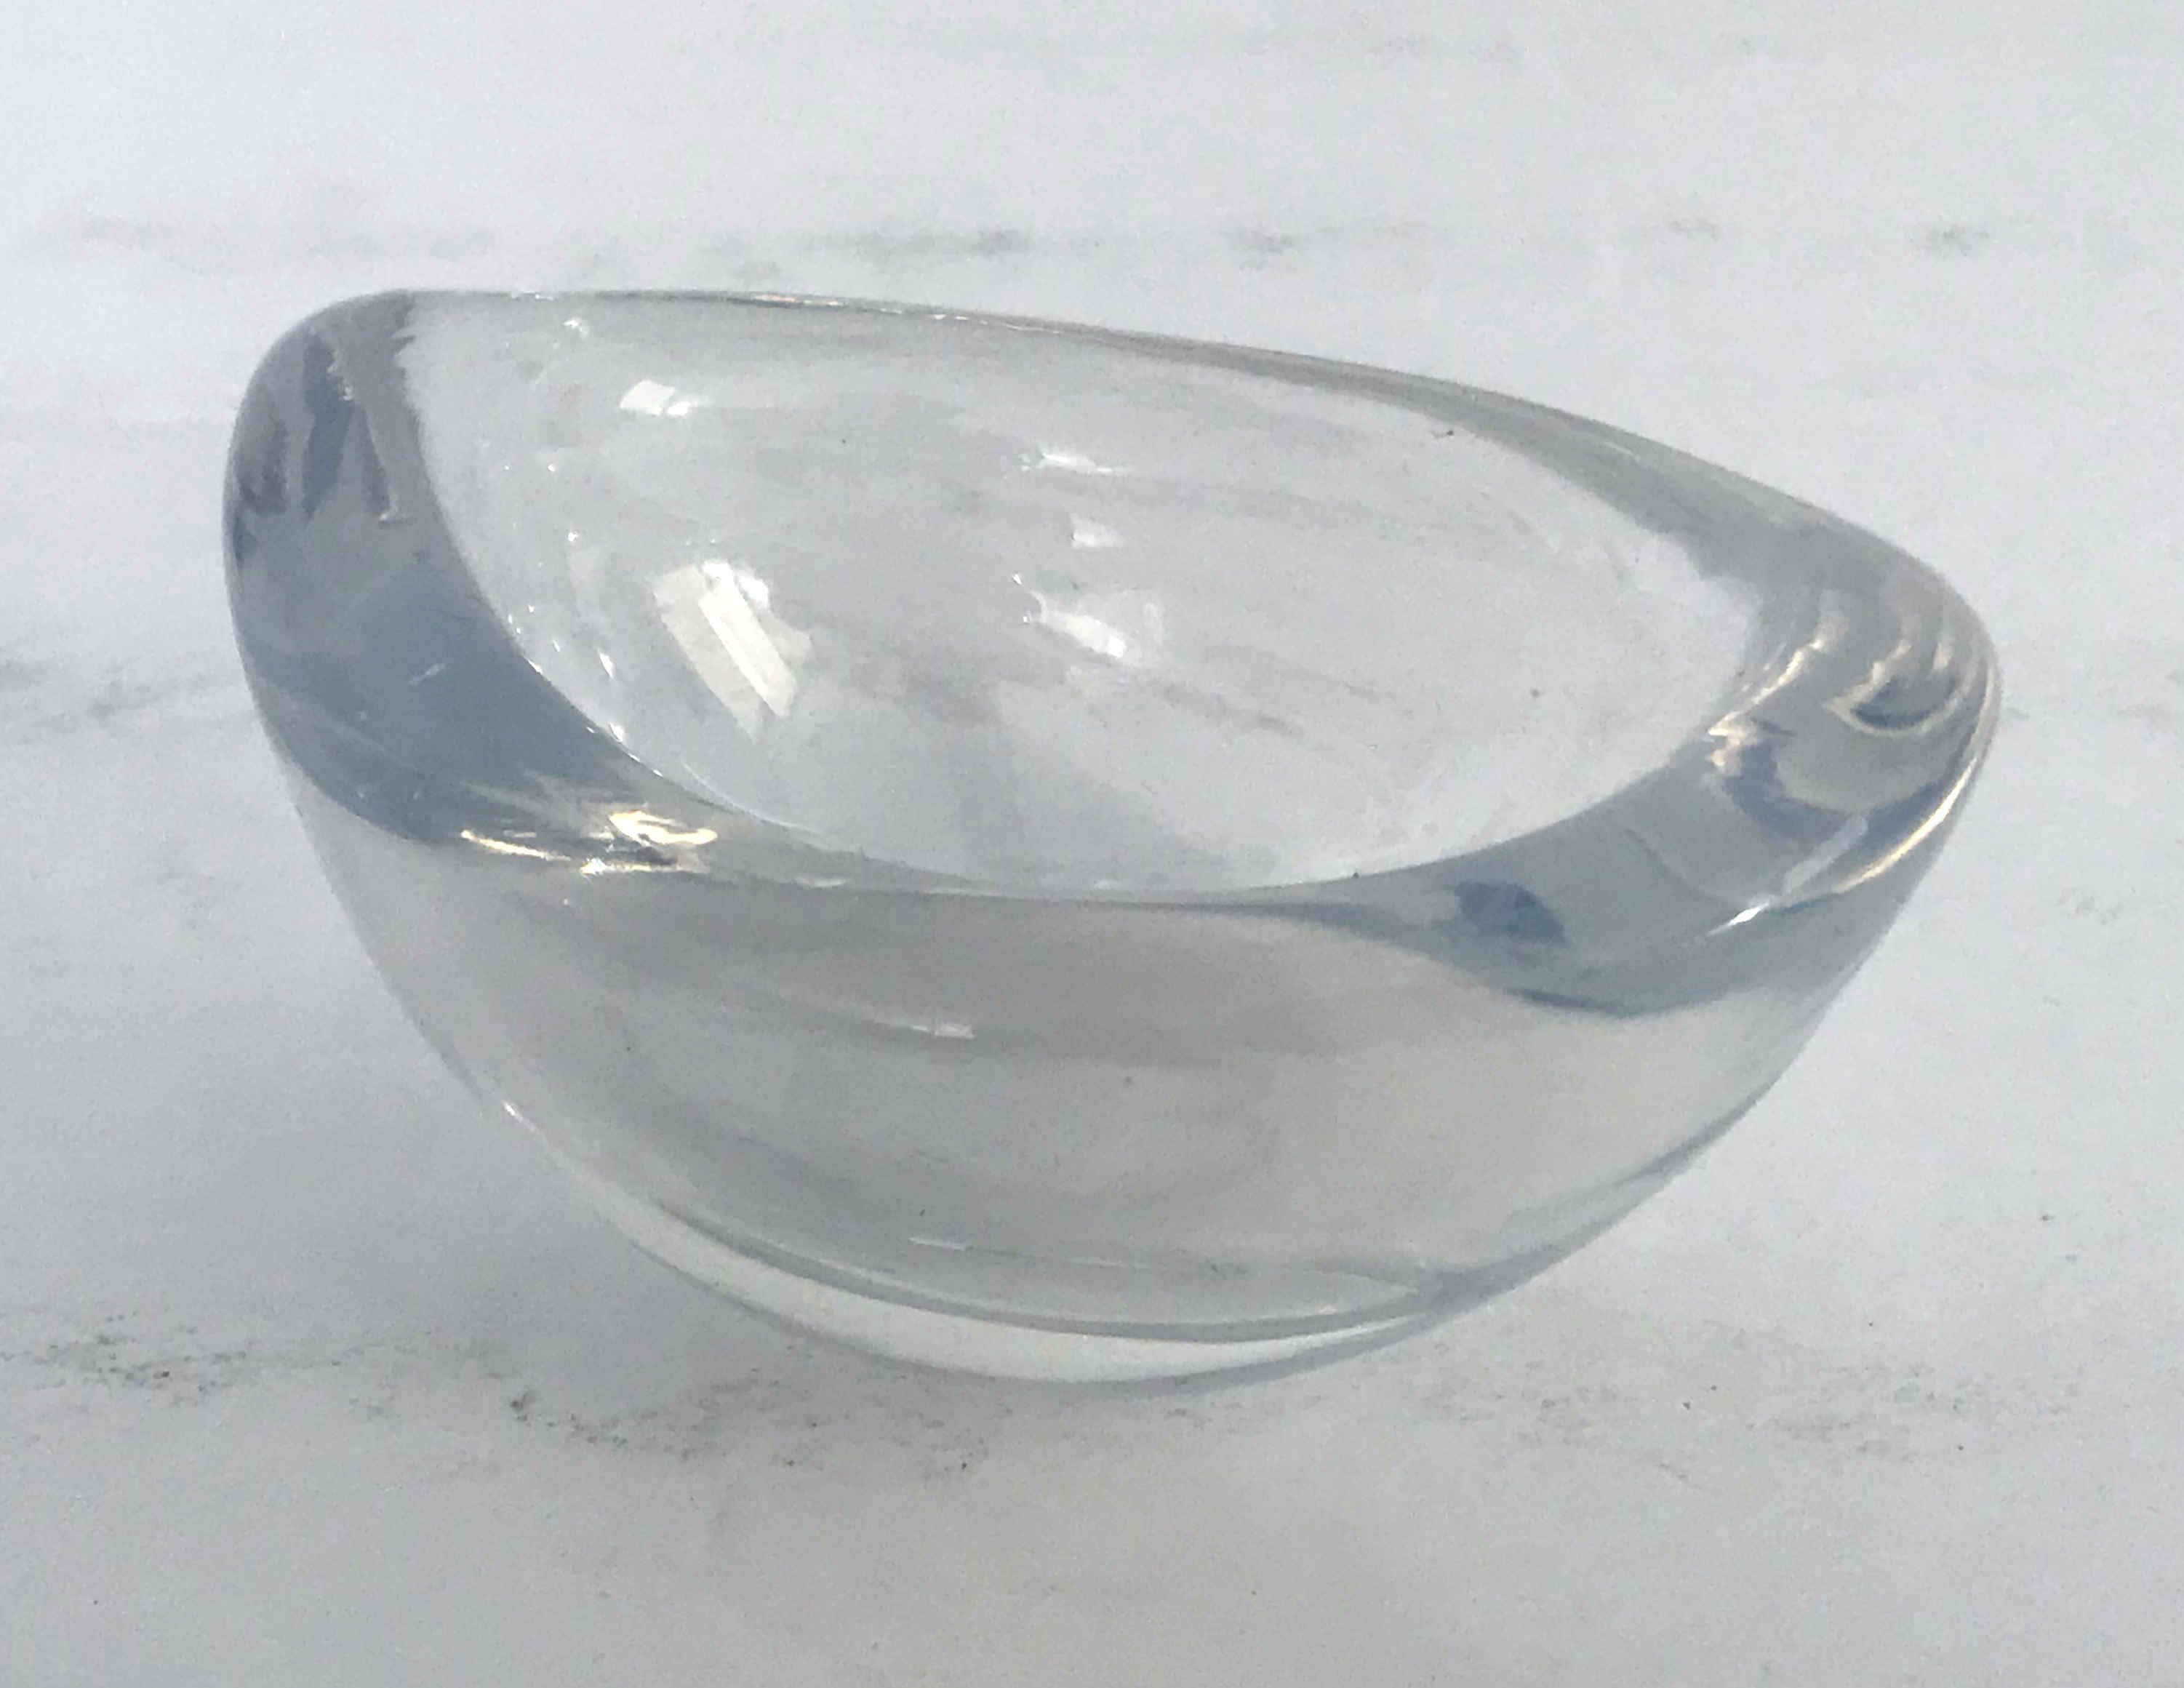 Rare and lovely opalescent art glass bowl by Orrefors / Made in Sweden, circa 1960s
Engraved and numbered 